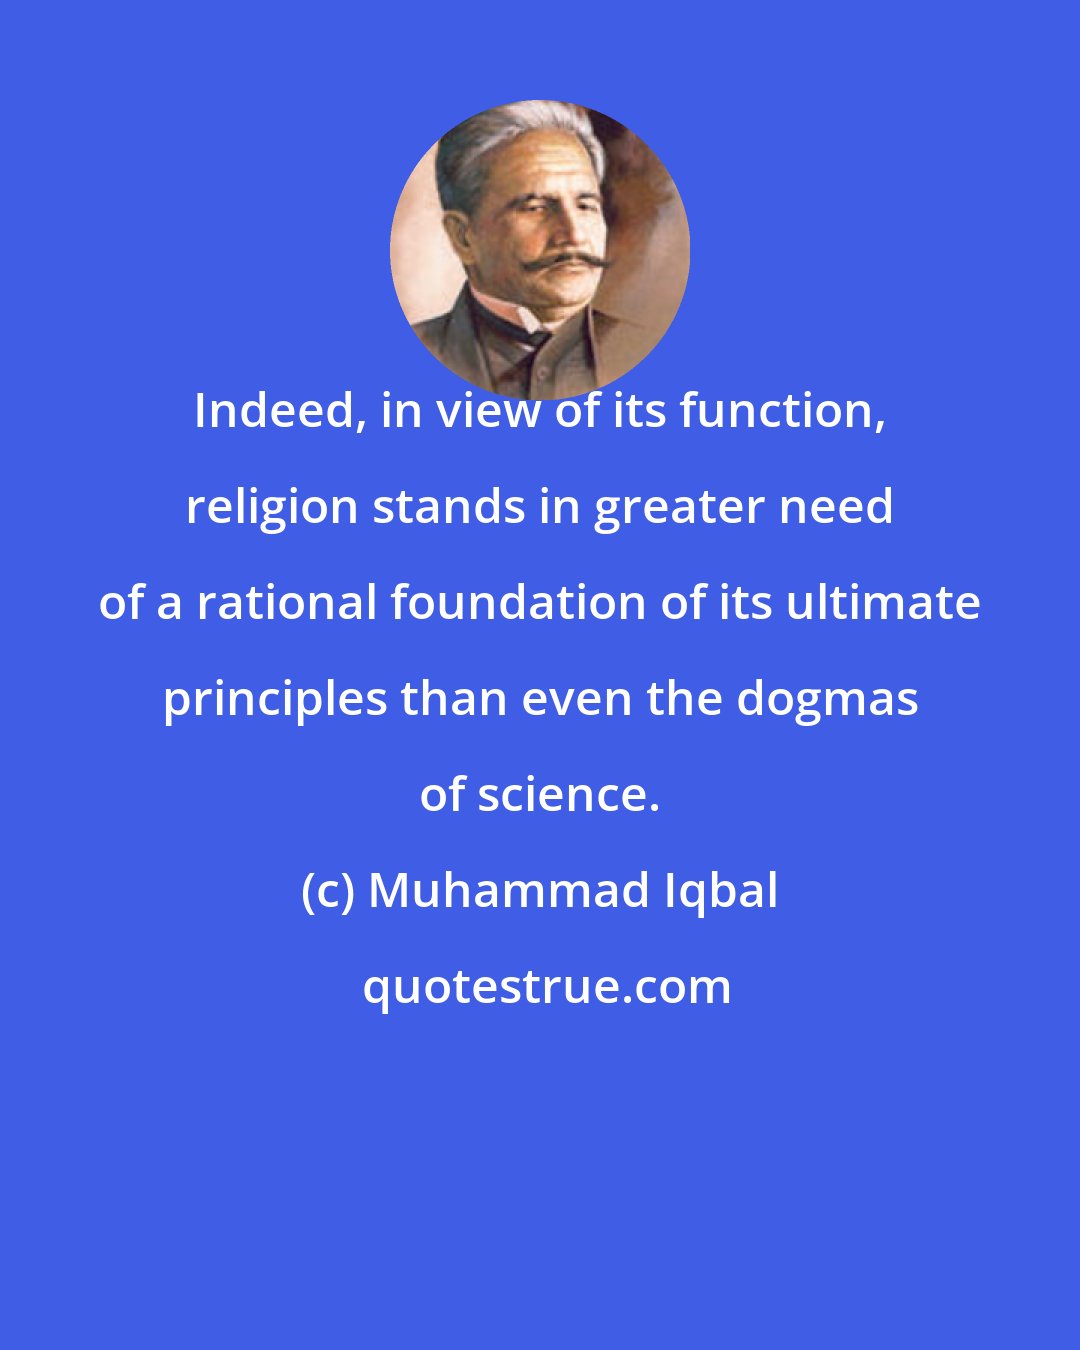 Muhammad Iqbal: Indeed, in view of its function, religion stands in greater need of a rational foundation of its ultimate principles than even the dogmas of science.